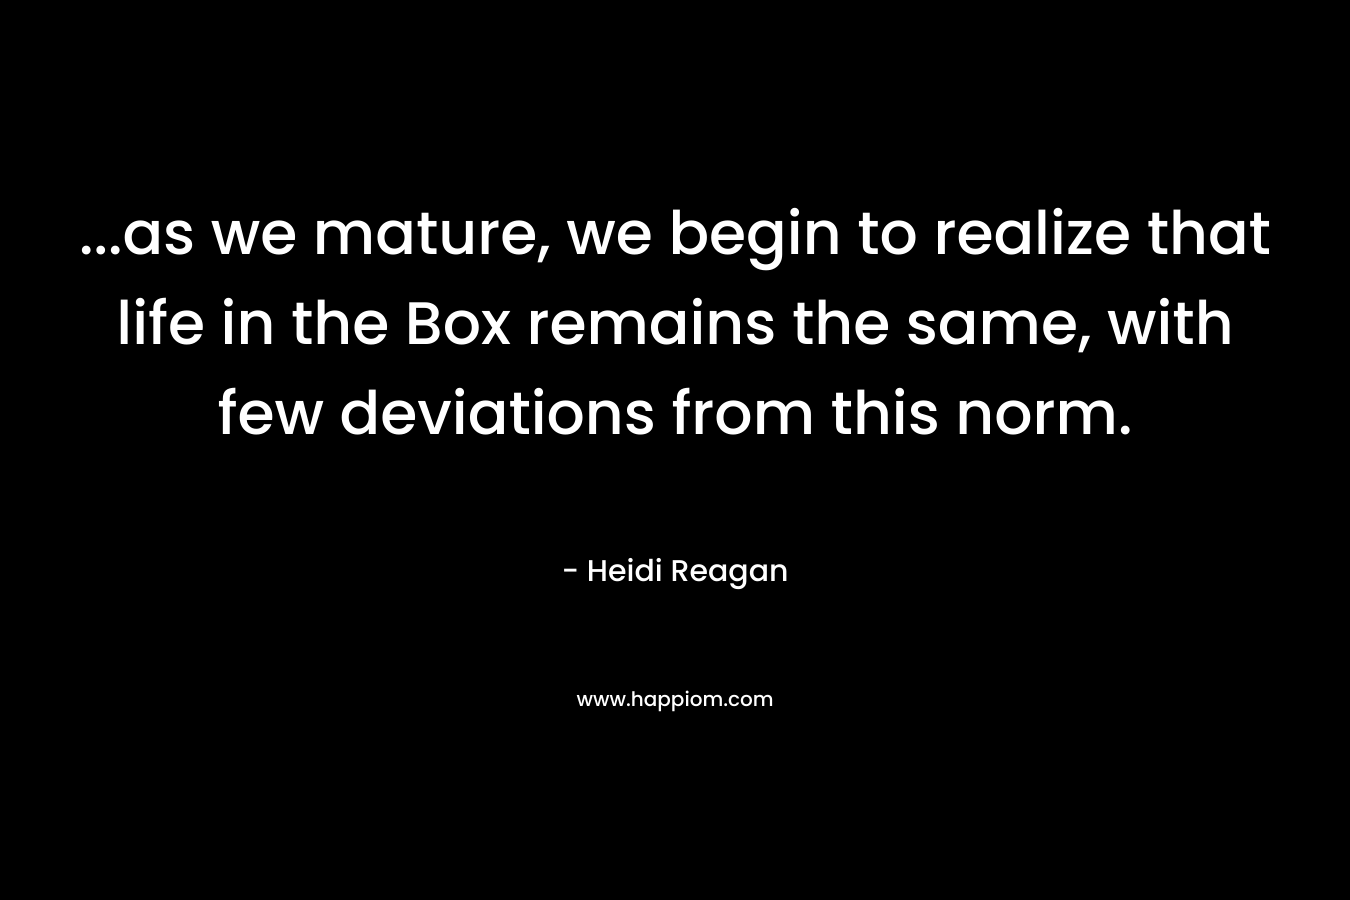 ...as we mature, we begin to realize that life in the Box remains the same, with few deviations from this norm.